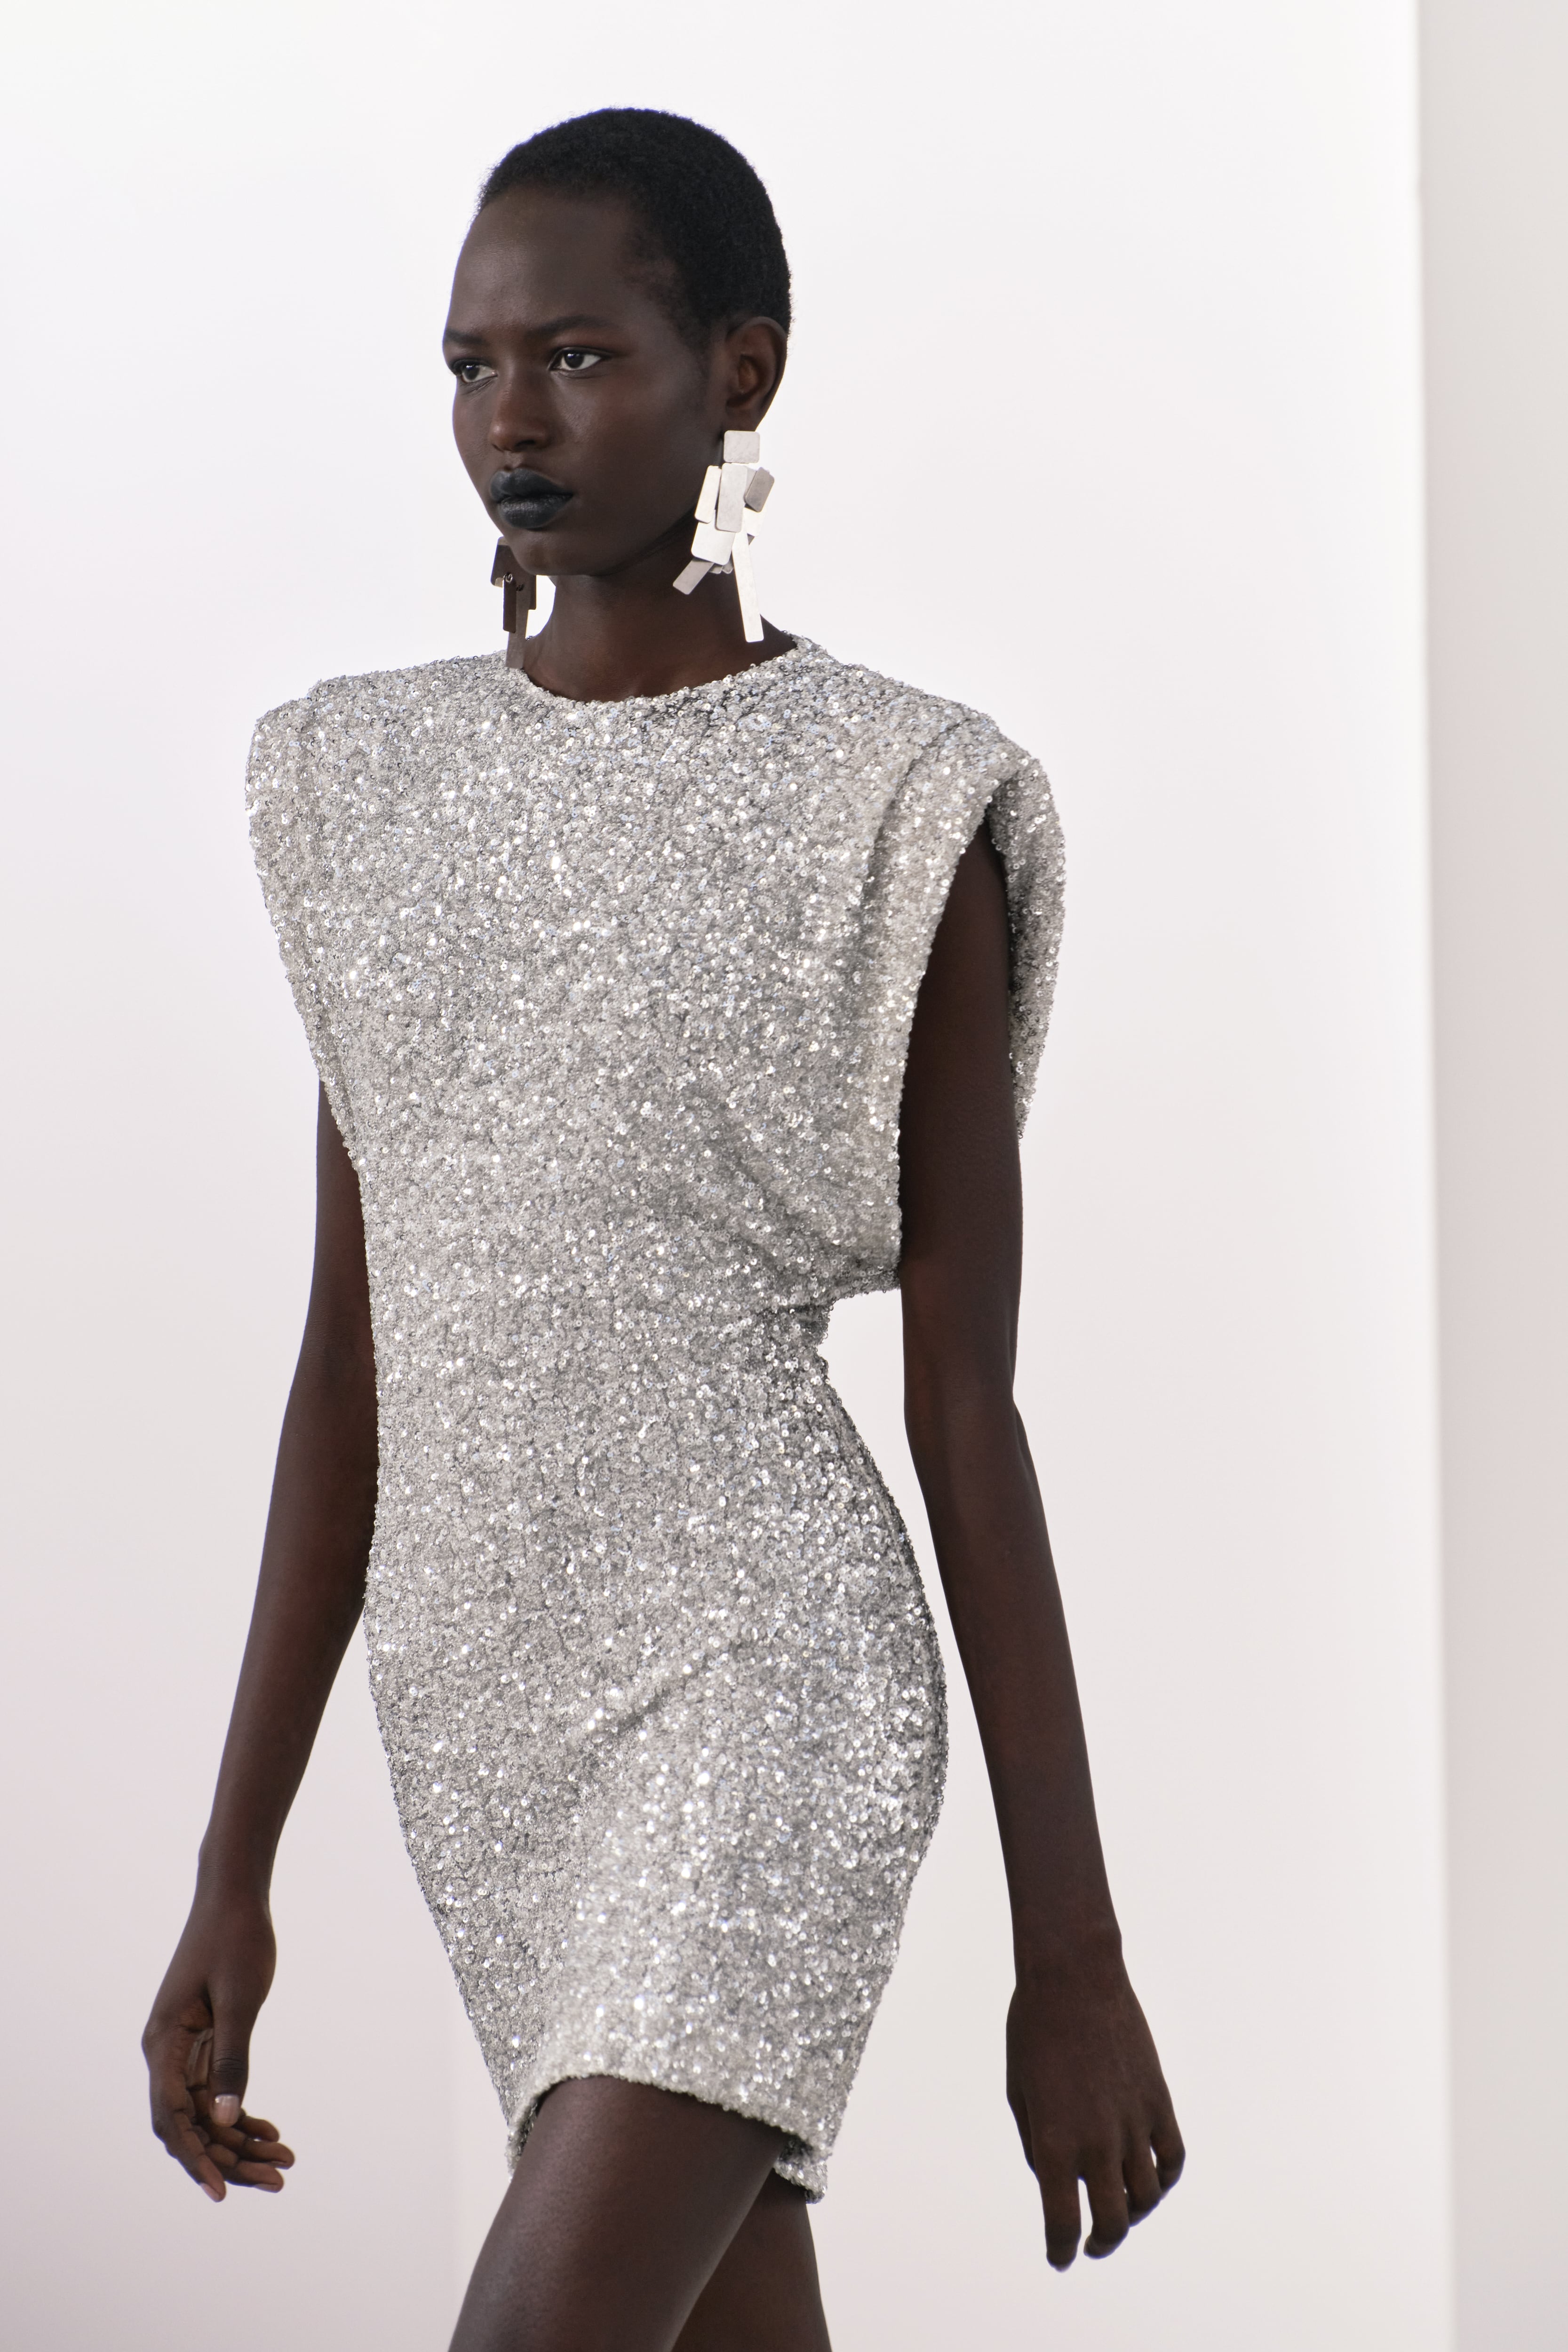 SHOULDER PADS SEQUIN DRESS ZW COLLECTION